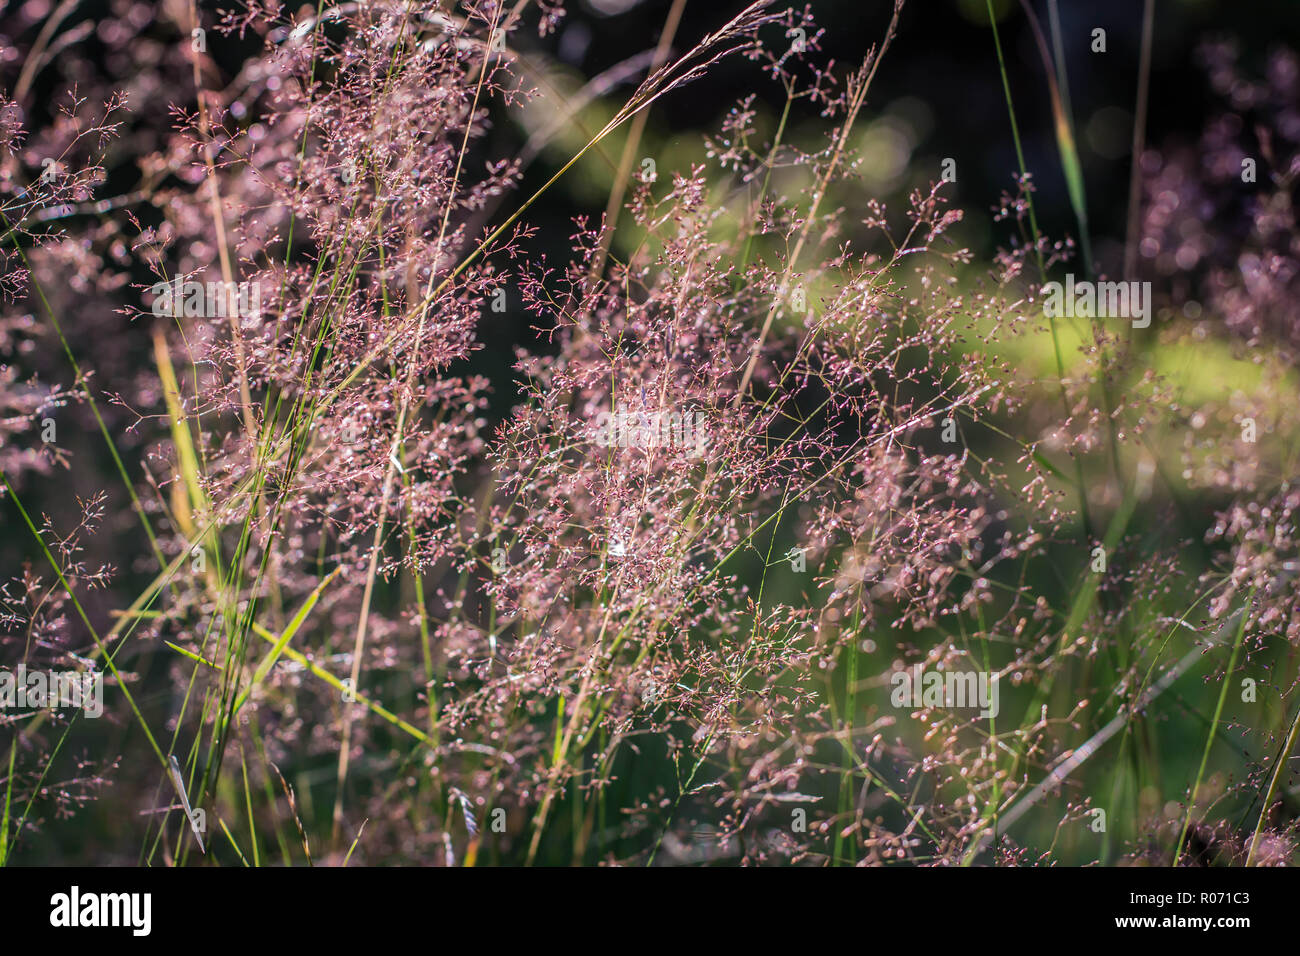 Grass spikes of grass Agrostis in National park Tara in western Serbia Stock Photo